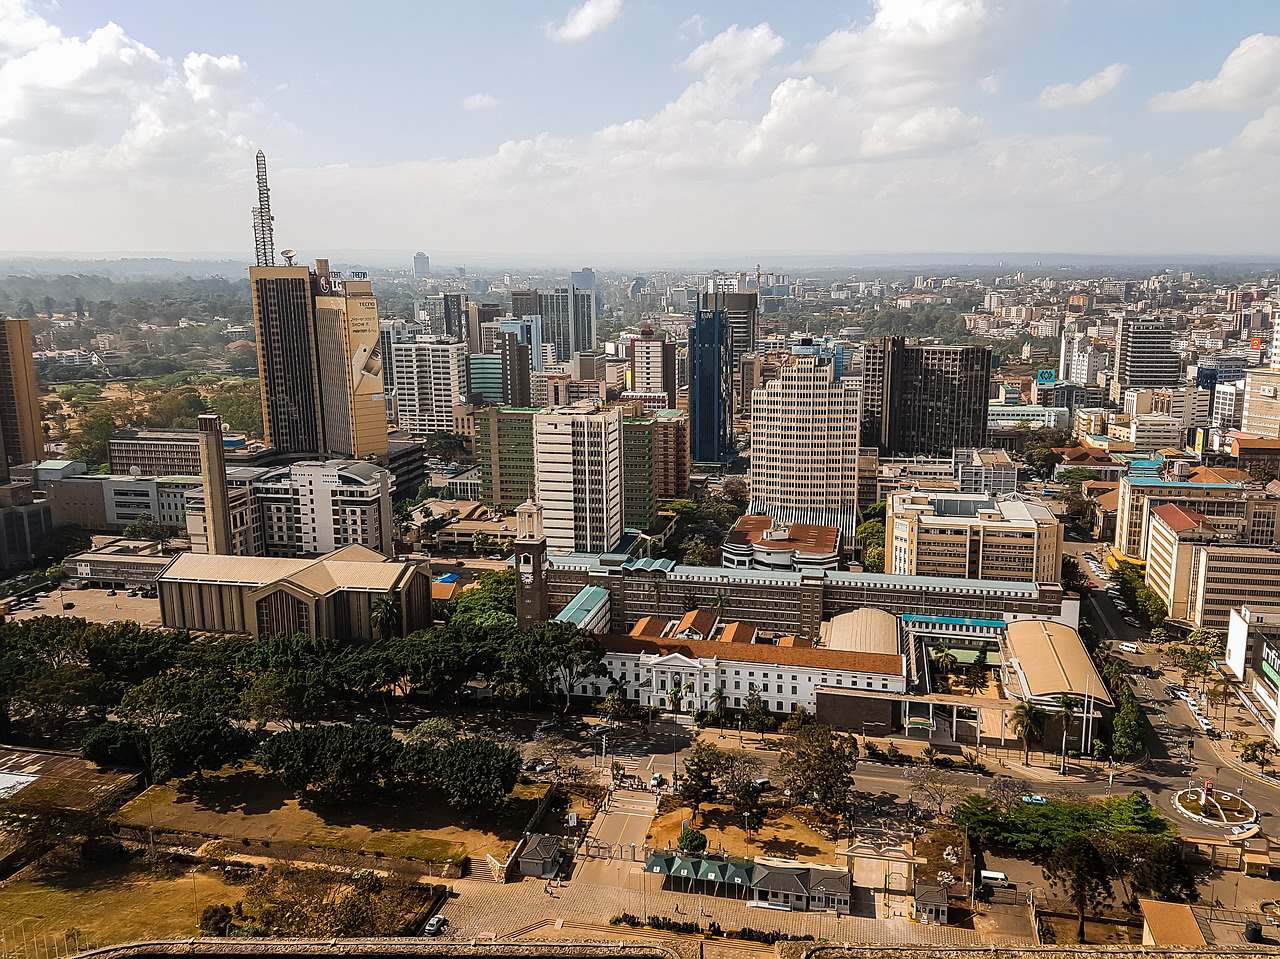 Kenya has the second Largest Economy in East Africa